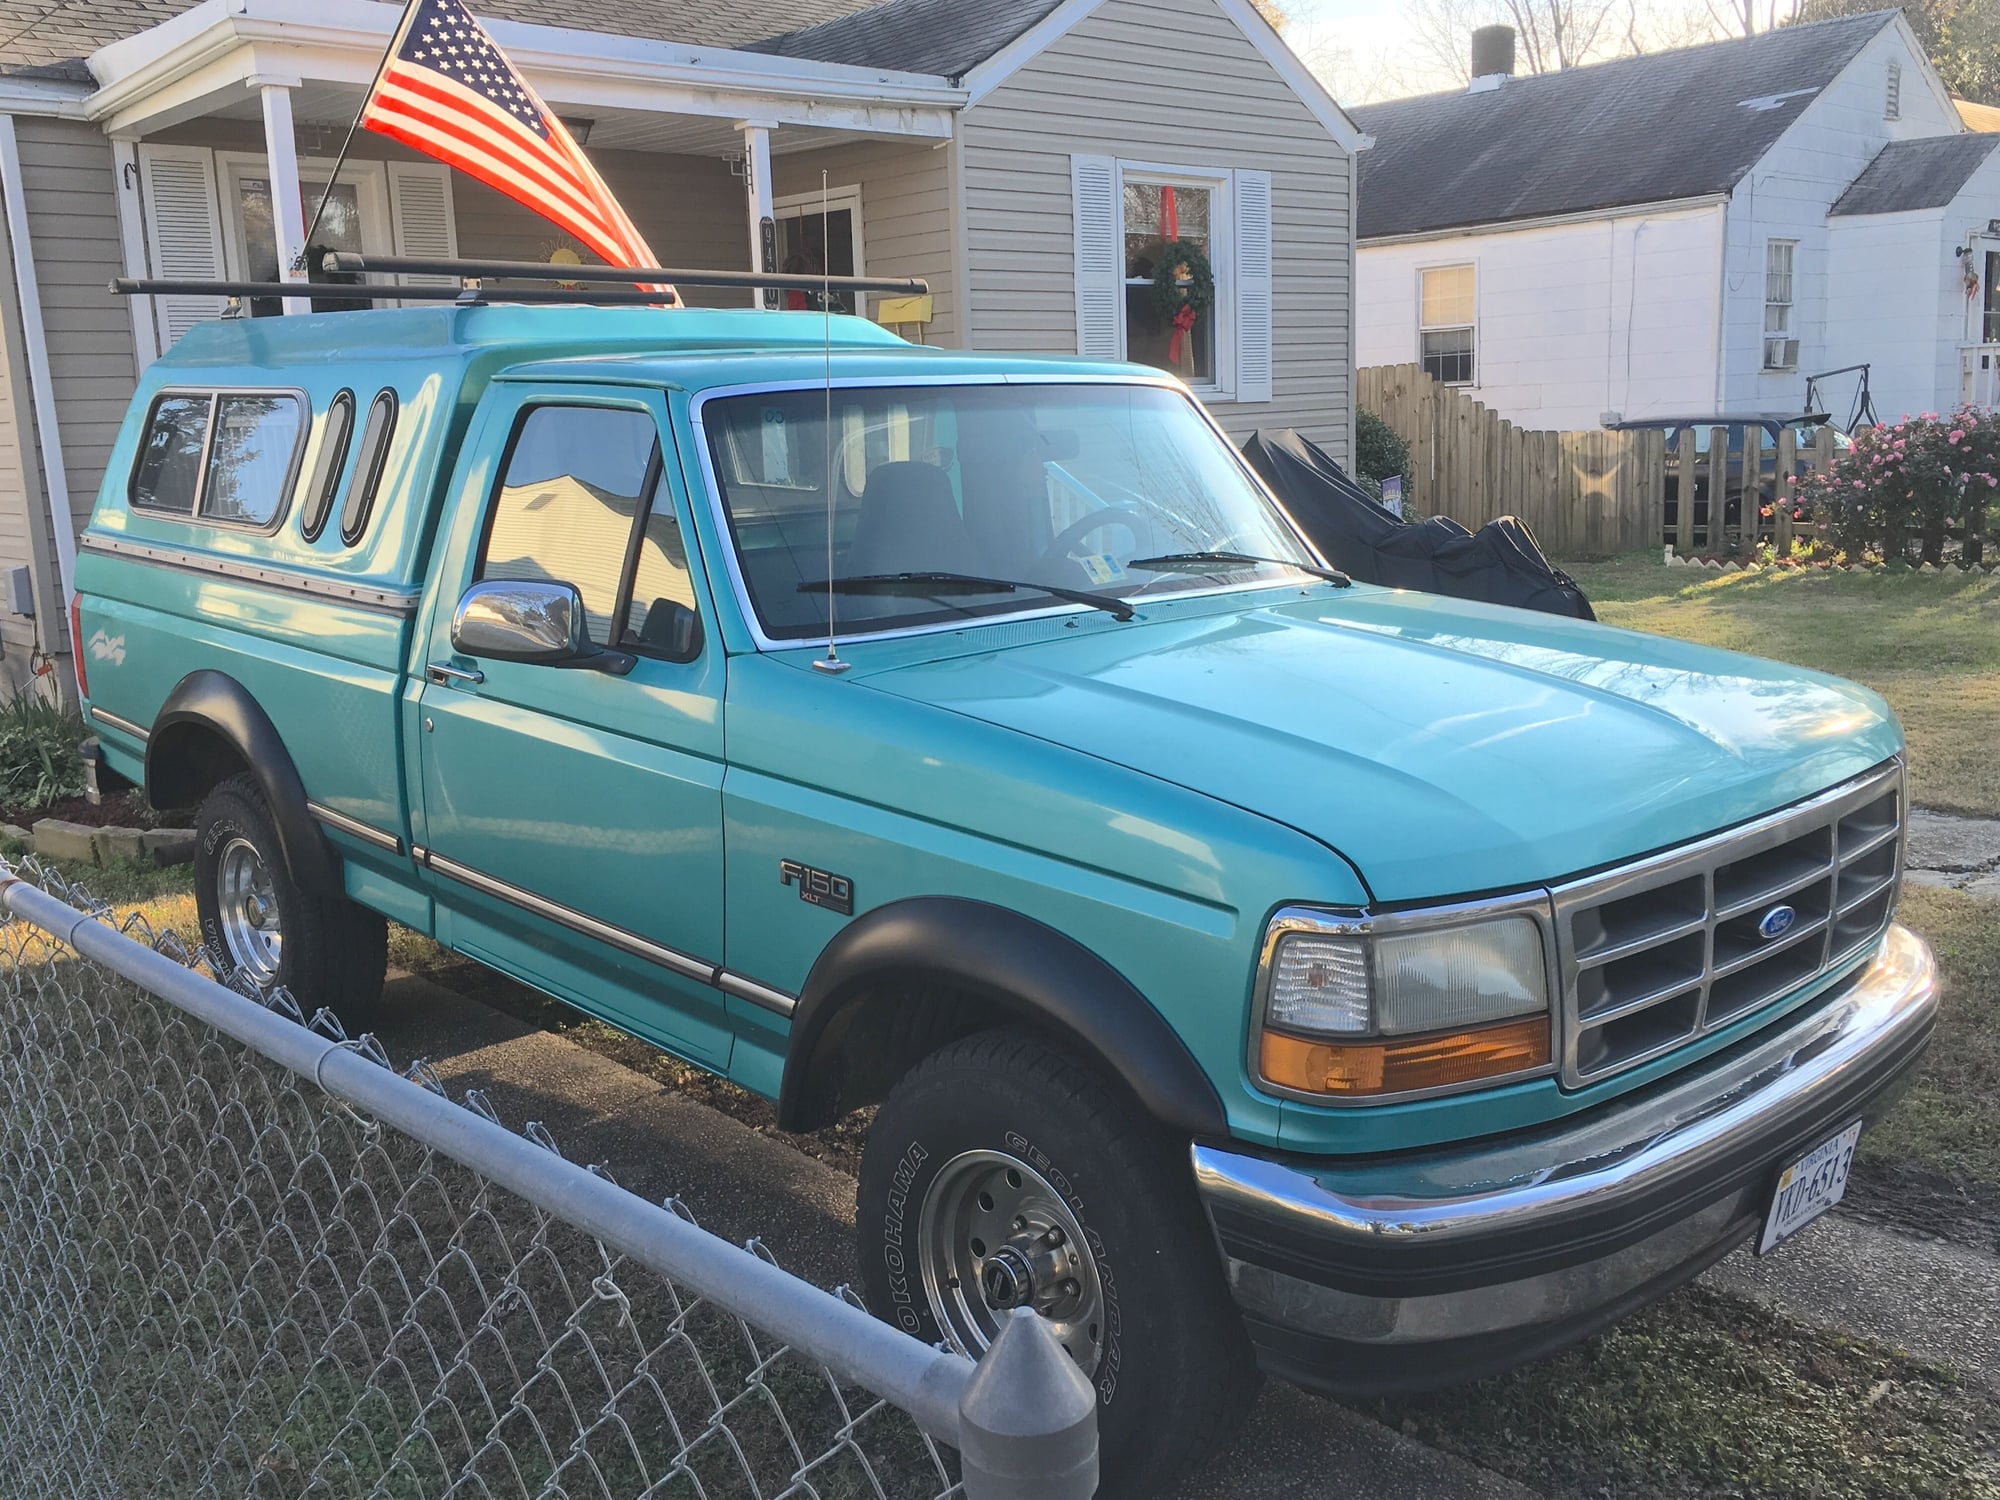 1995 F 150 4x4 SWB SC Ford Truck Enthusiasts Forums.